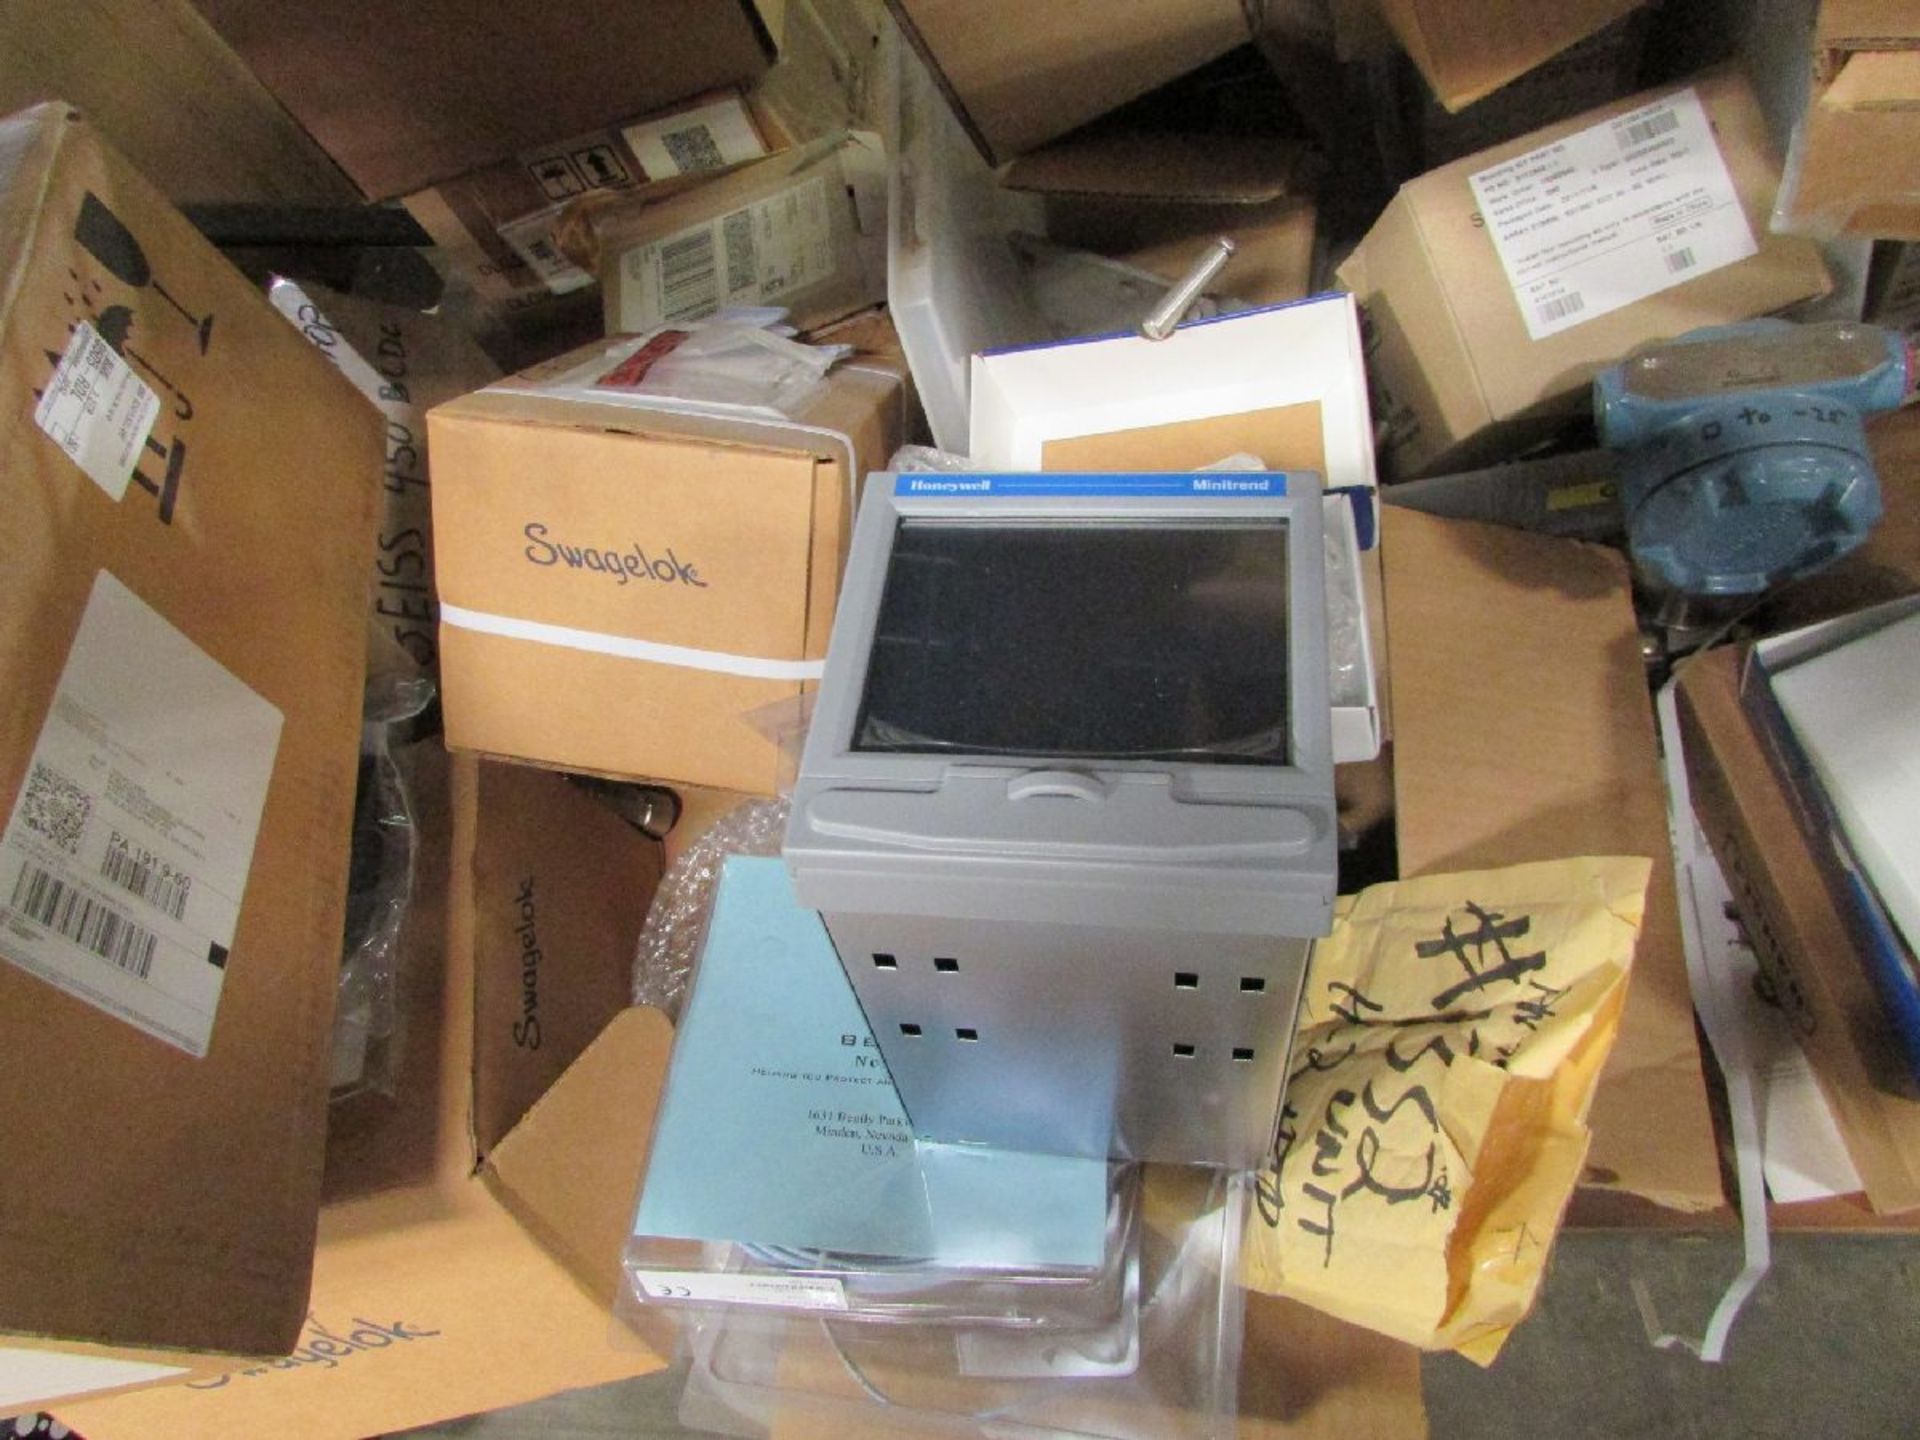 Lot of Assorted Power Supplies, Swagelok, Honeywell Displays, Valves Spare Parts - Image 9 of 12